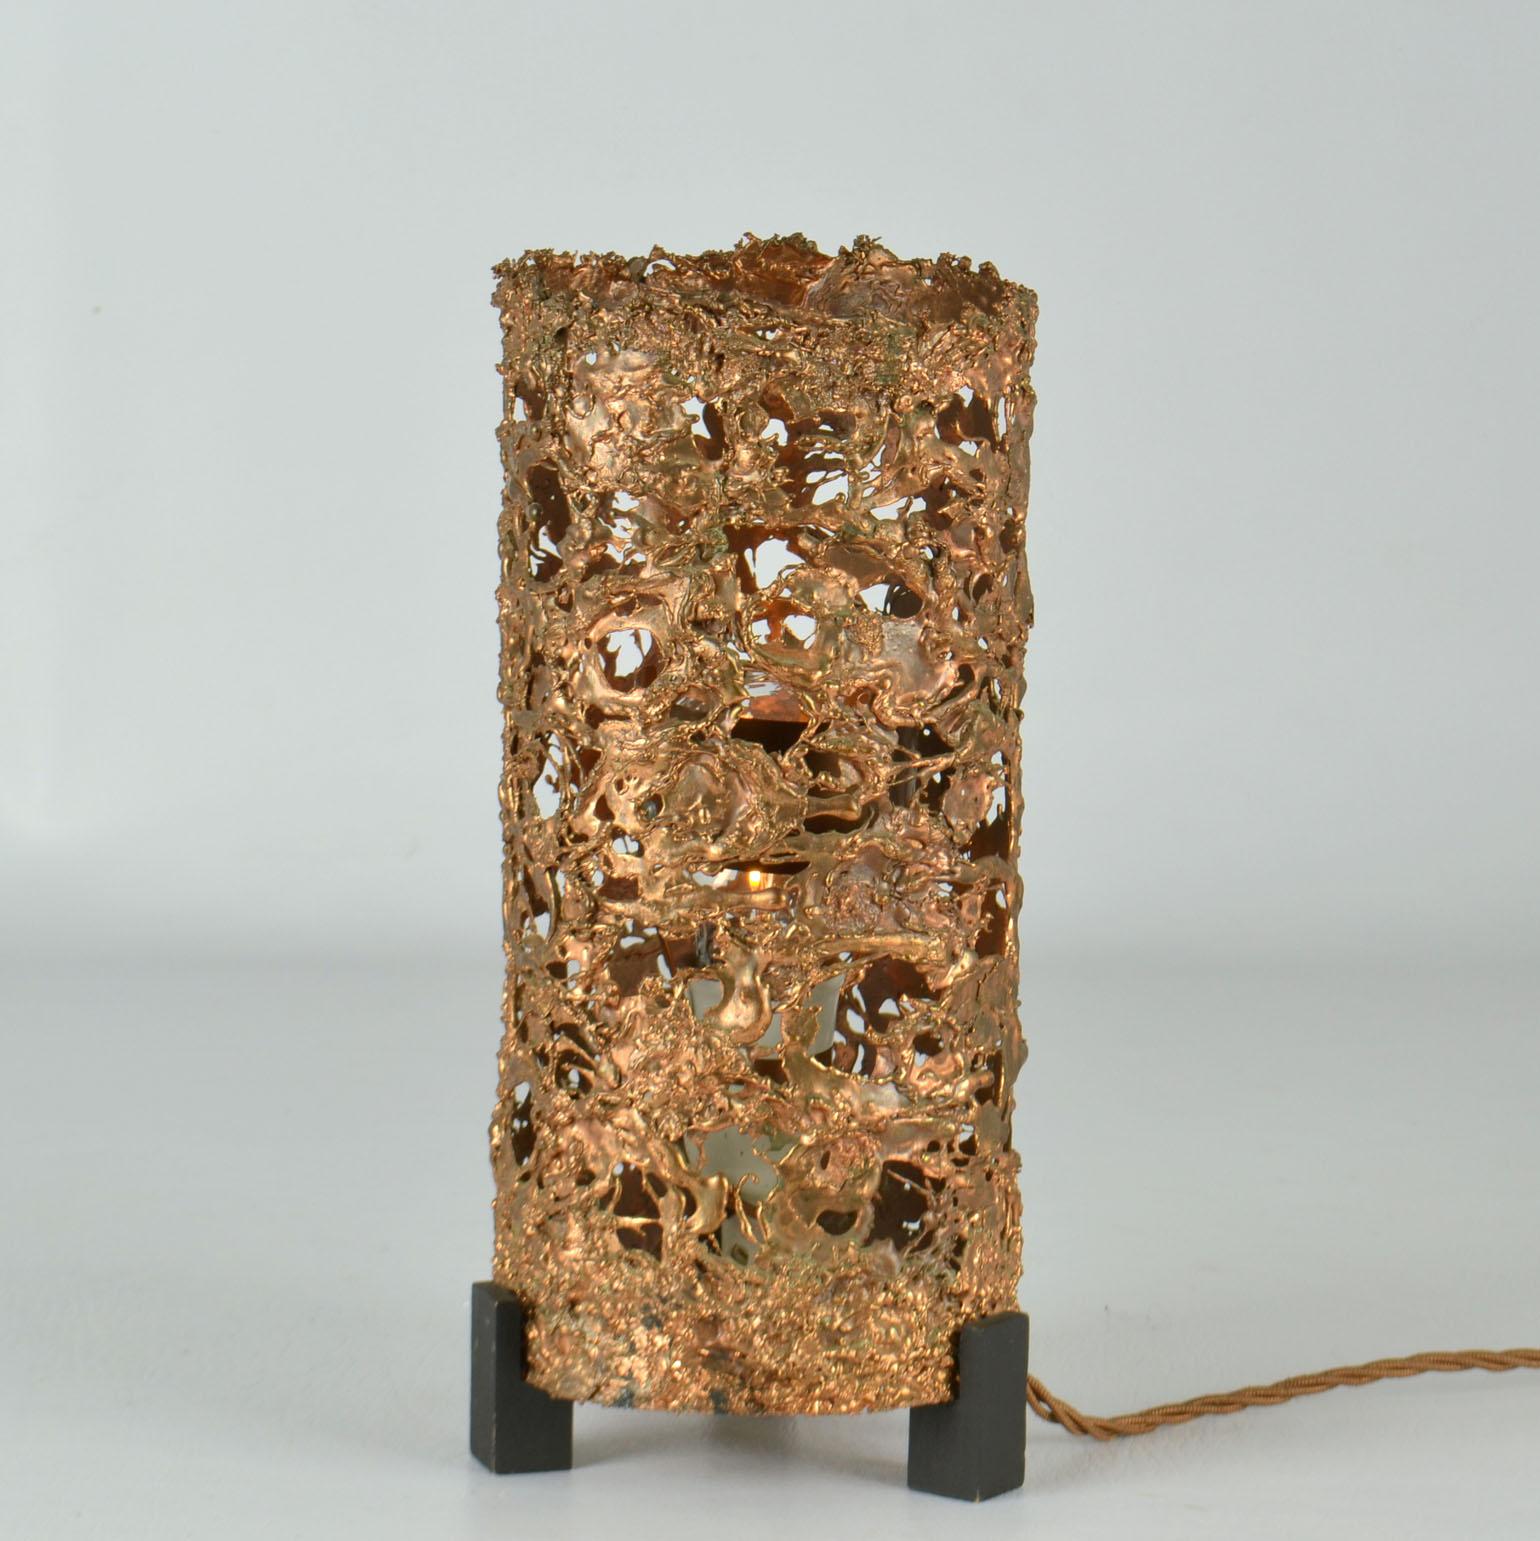 Organic Relief Copper Table Lamp by Aimo Tukiainen Finland, 1960's In Excellent Condition For Sale In London, GB